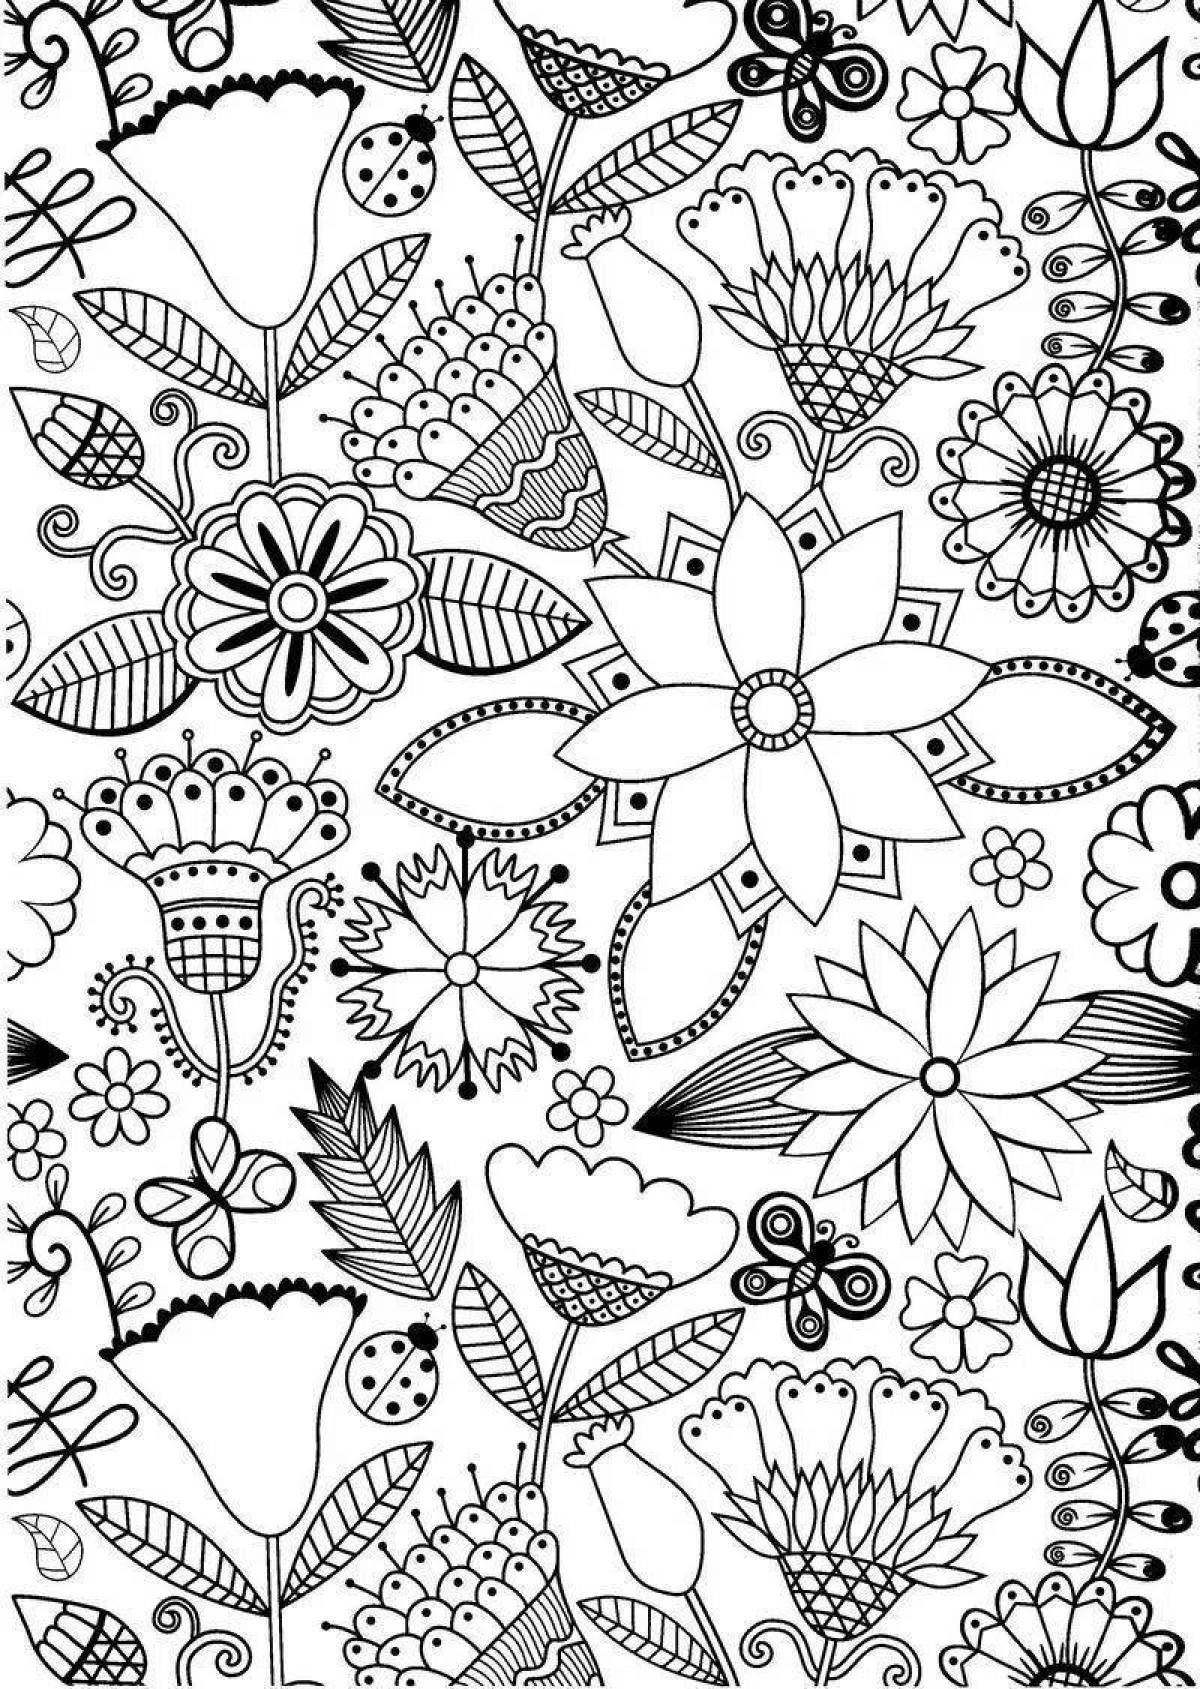 Intriguing coloring book with small patterns